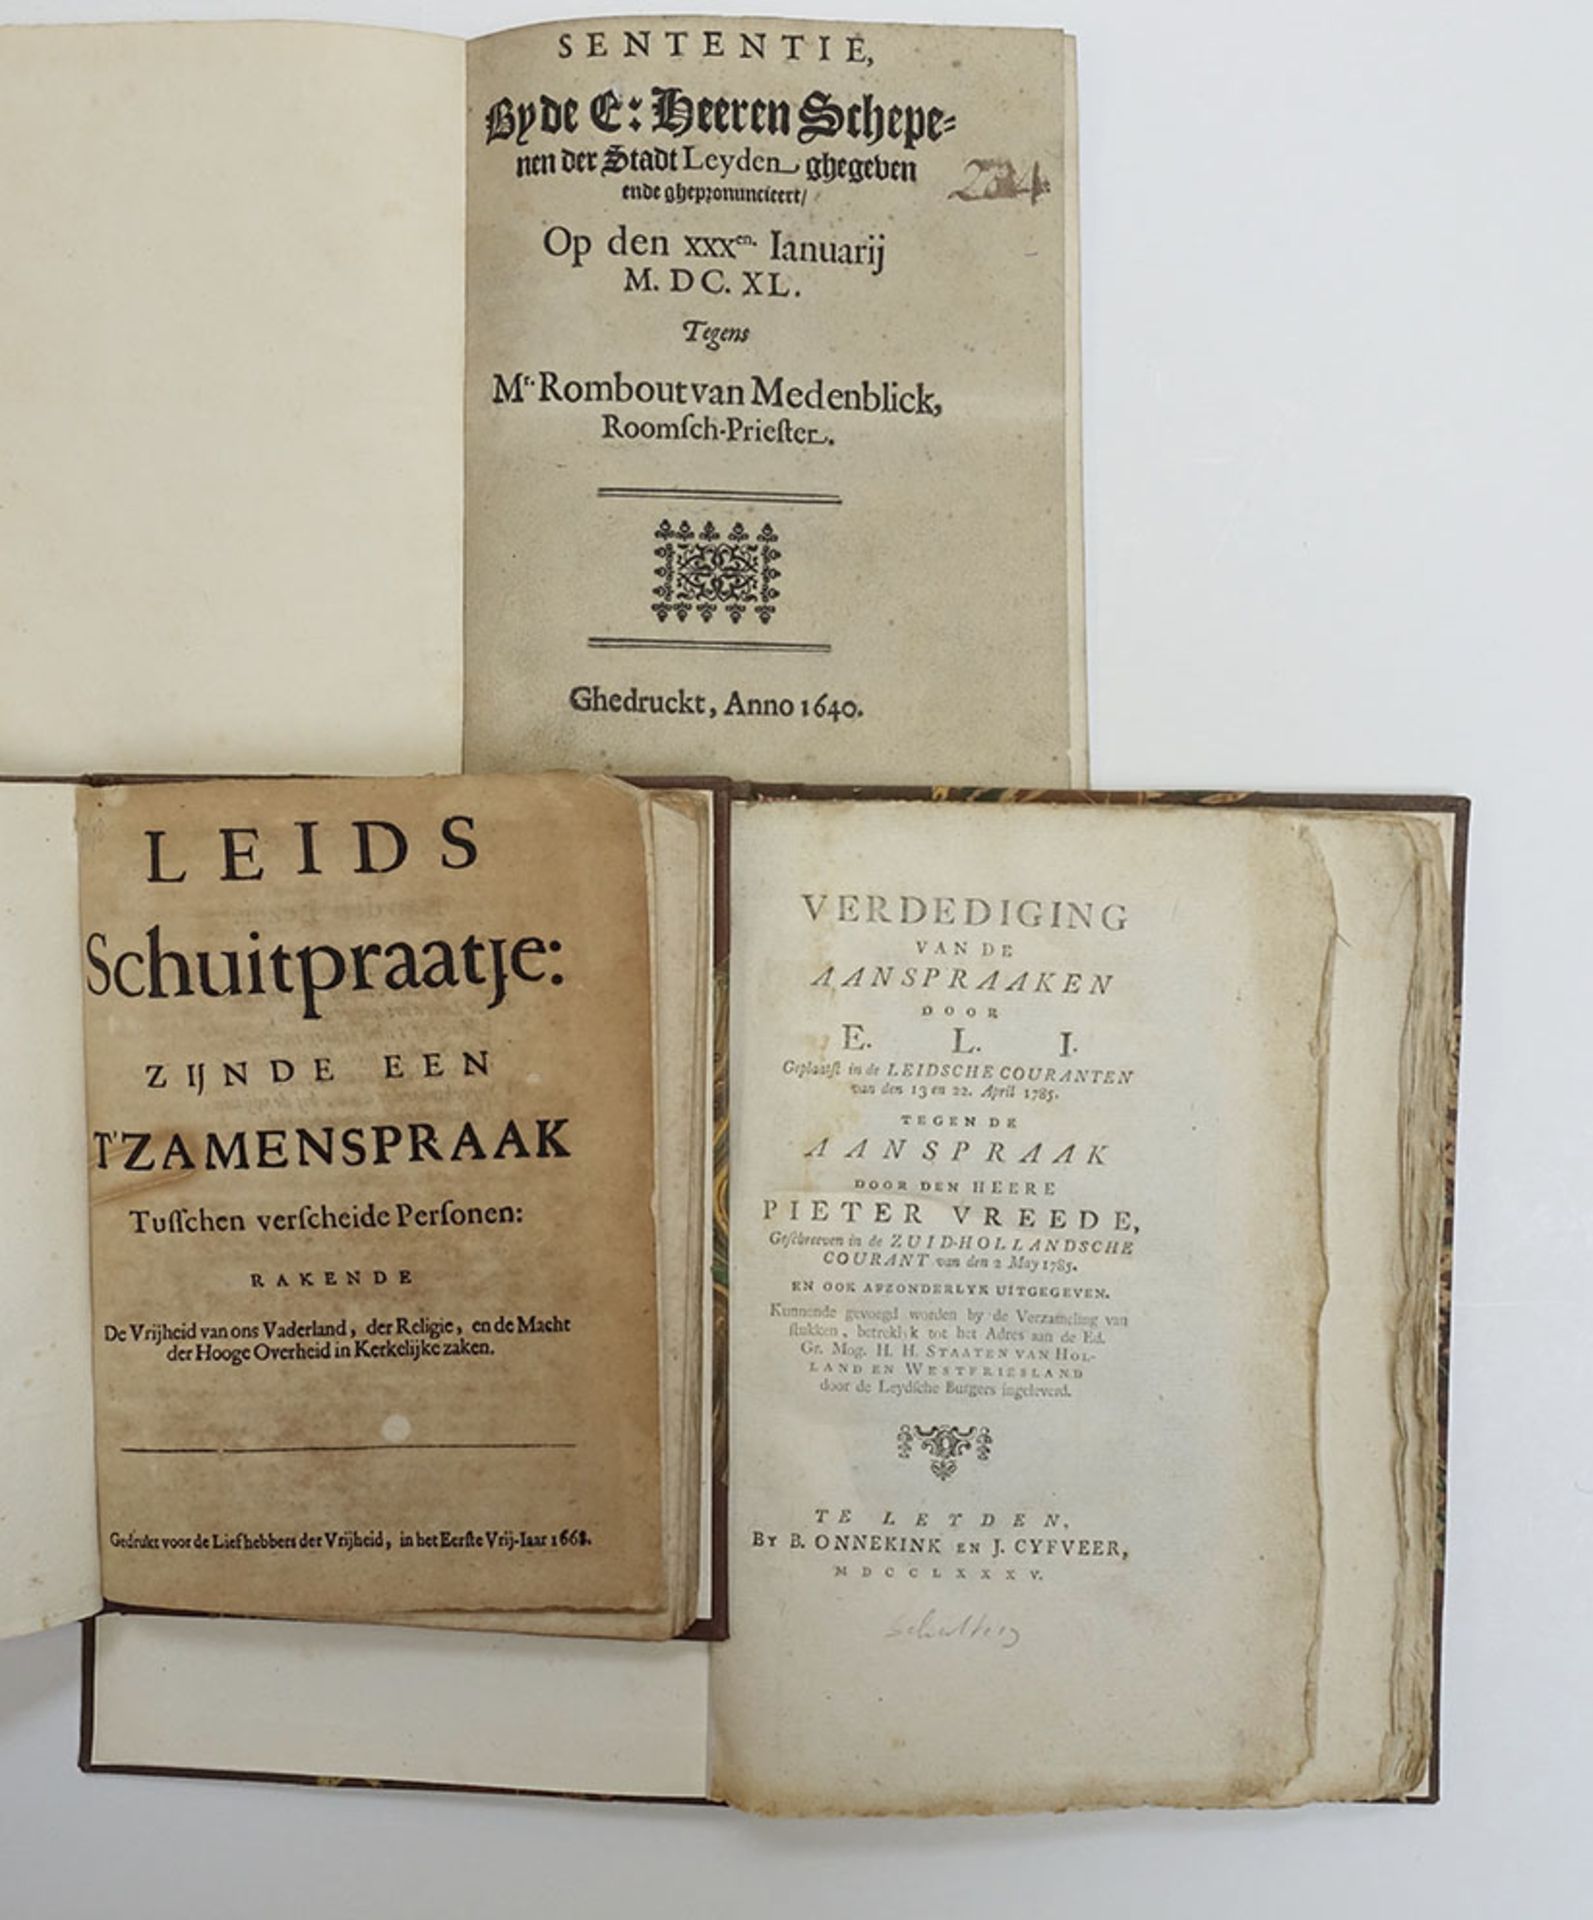 LEIDEN -- COLLECTION of 36 ordinances, pamphlets, decrees, instructions, a.o. small publications on